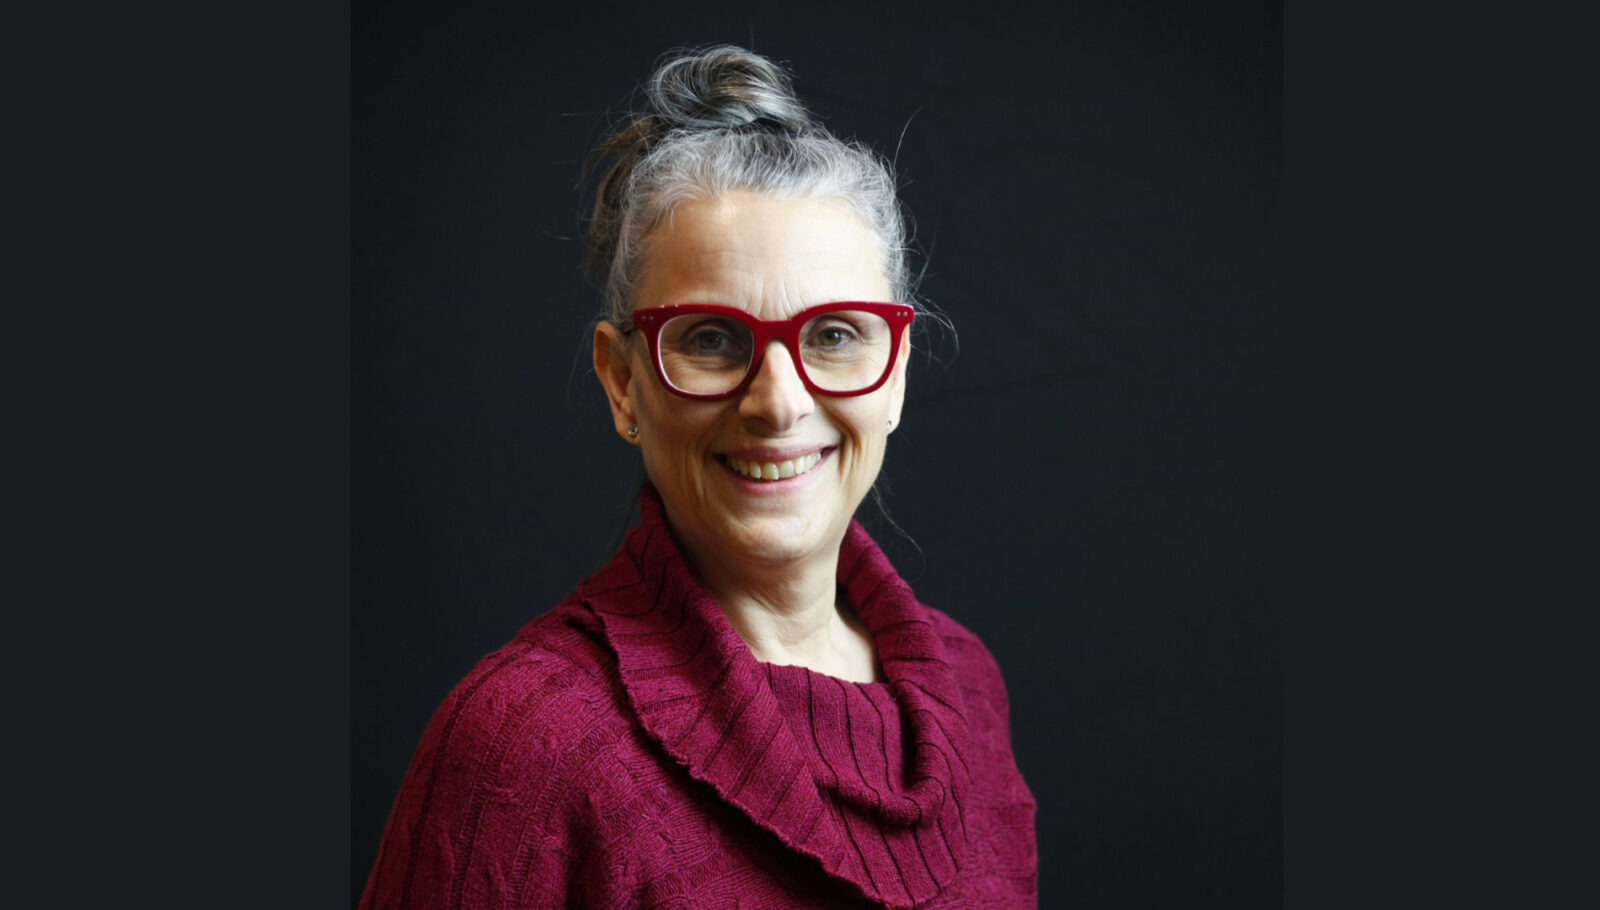 Nadia Drouin, Executive Director of En Piste, is a middle-aged woman with gray hair in a bun, a smile, and smart attire. She wears a red cowl-necked sweater that matches her red-framed glasses.